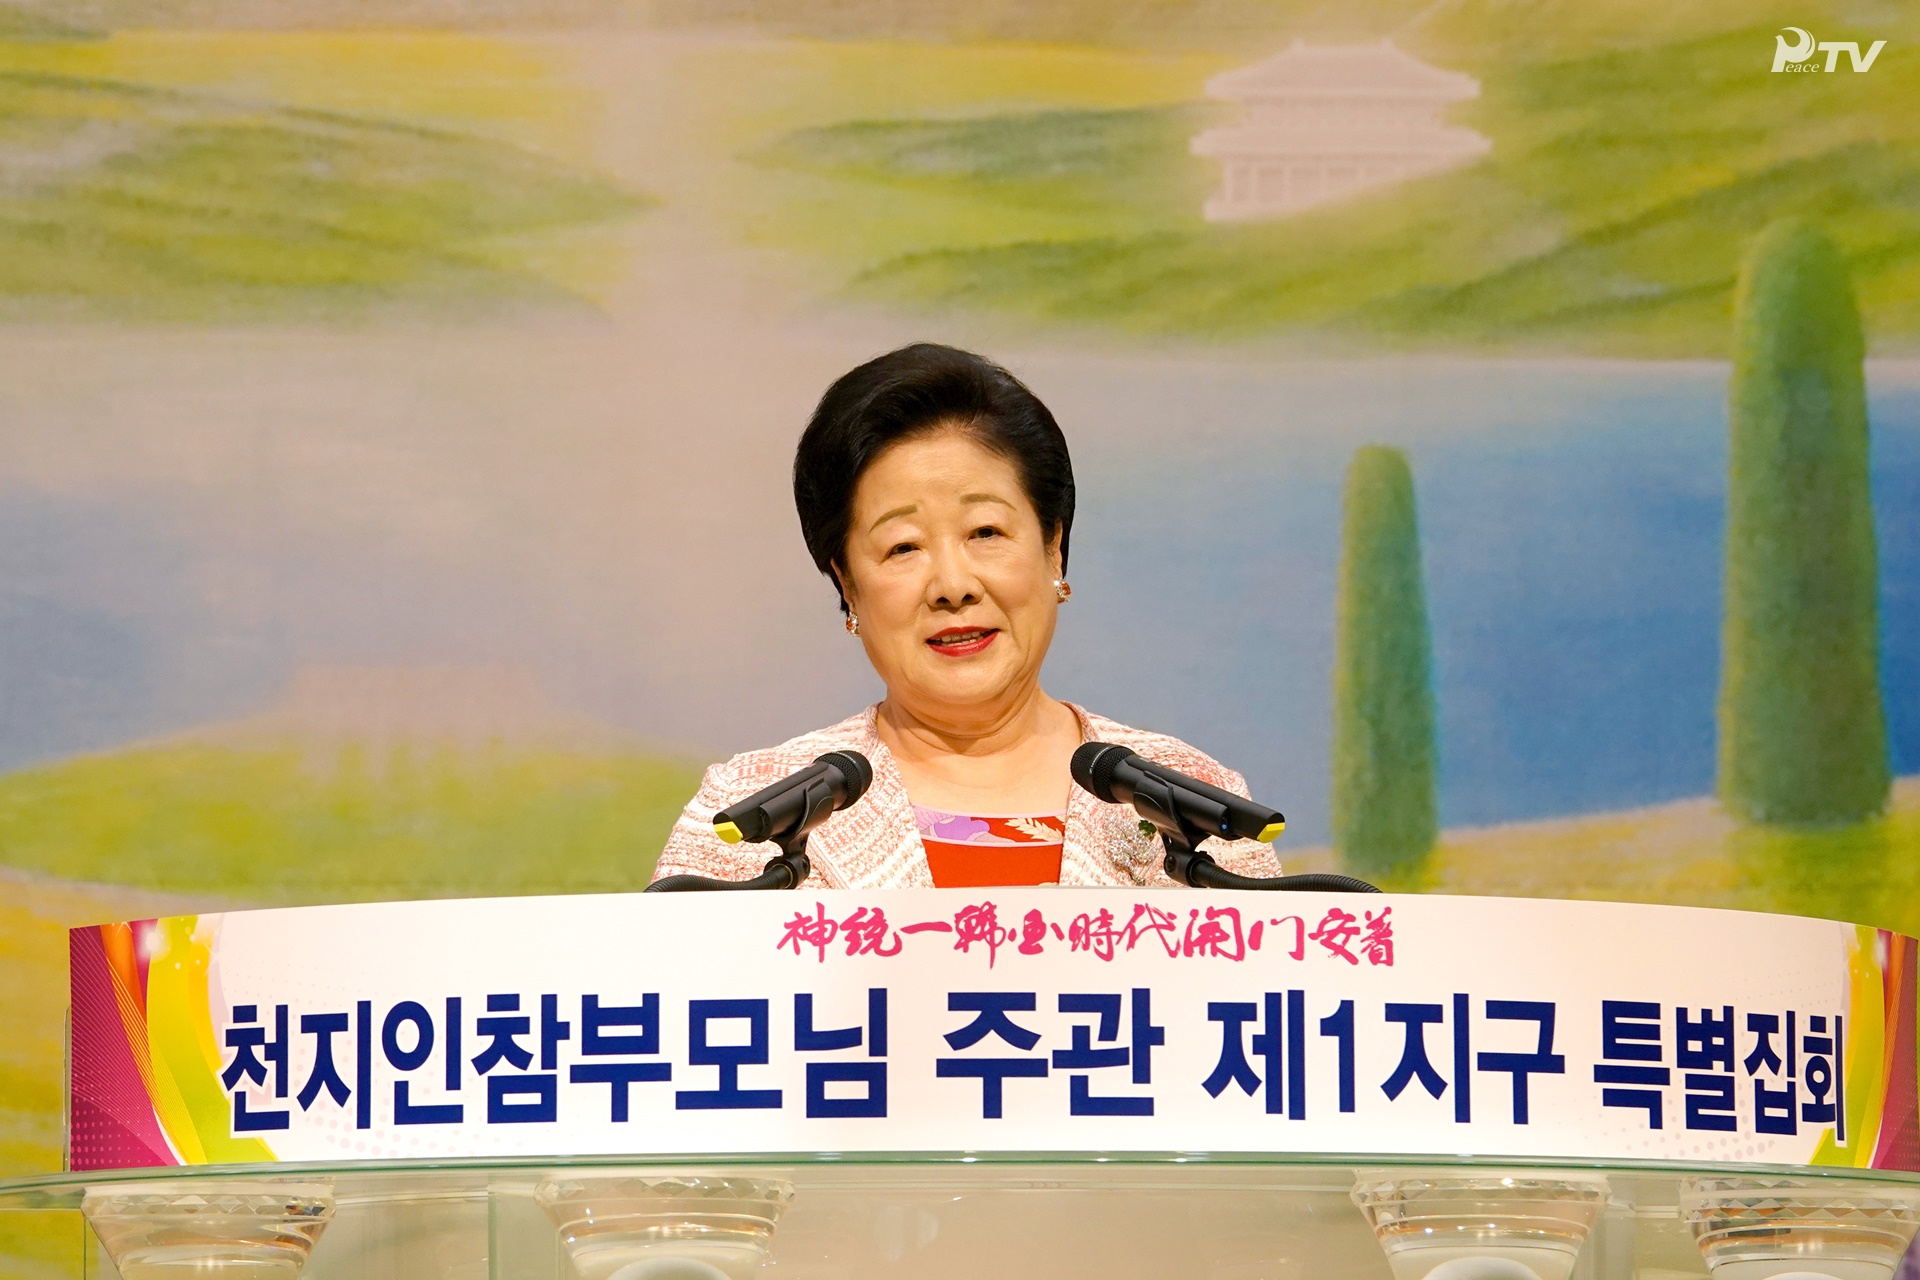 Special Meeting with Sub-region 1 - hosted by True Parents to Open the Era to Firmly Establish the Heavenly Unified Korea.